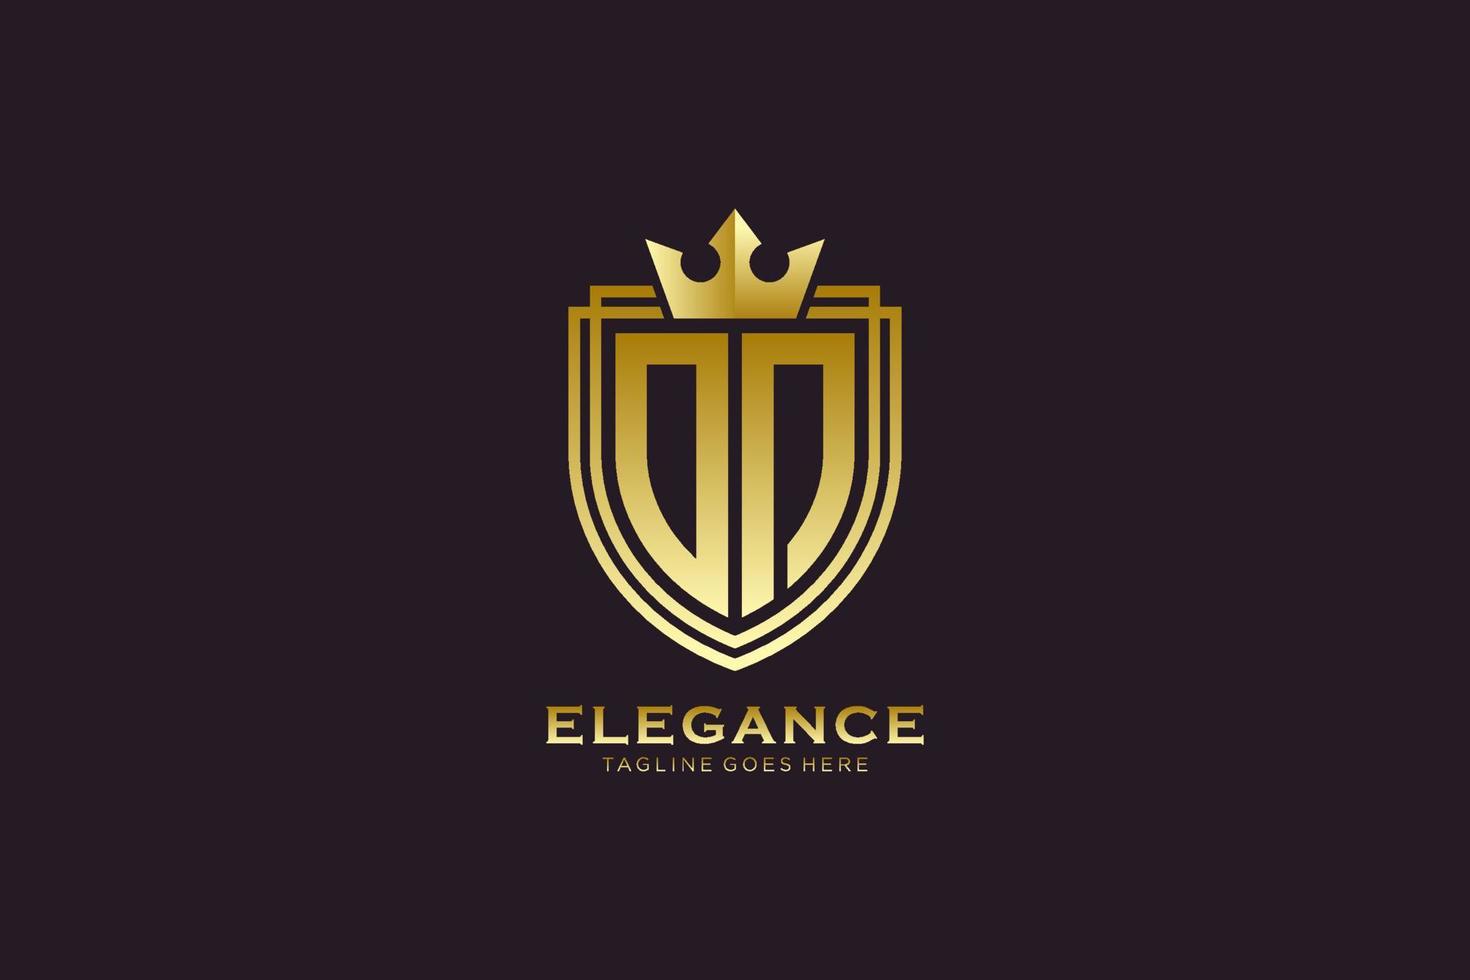 initial ON elegant luxury monogram logo or badge template with scrolls and royal crown - perfect for luxurious branding projects vector